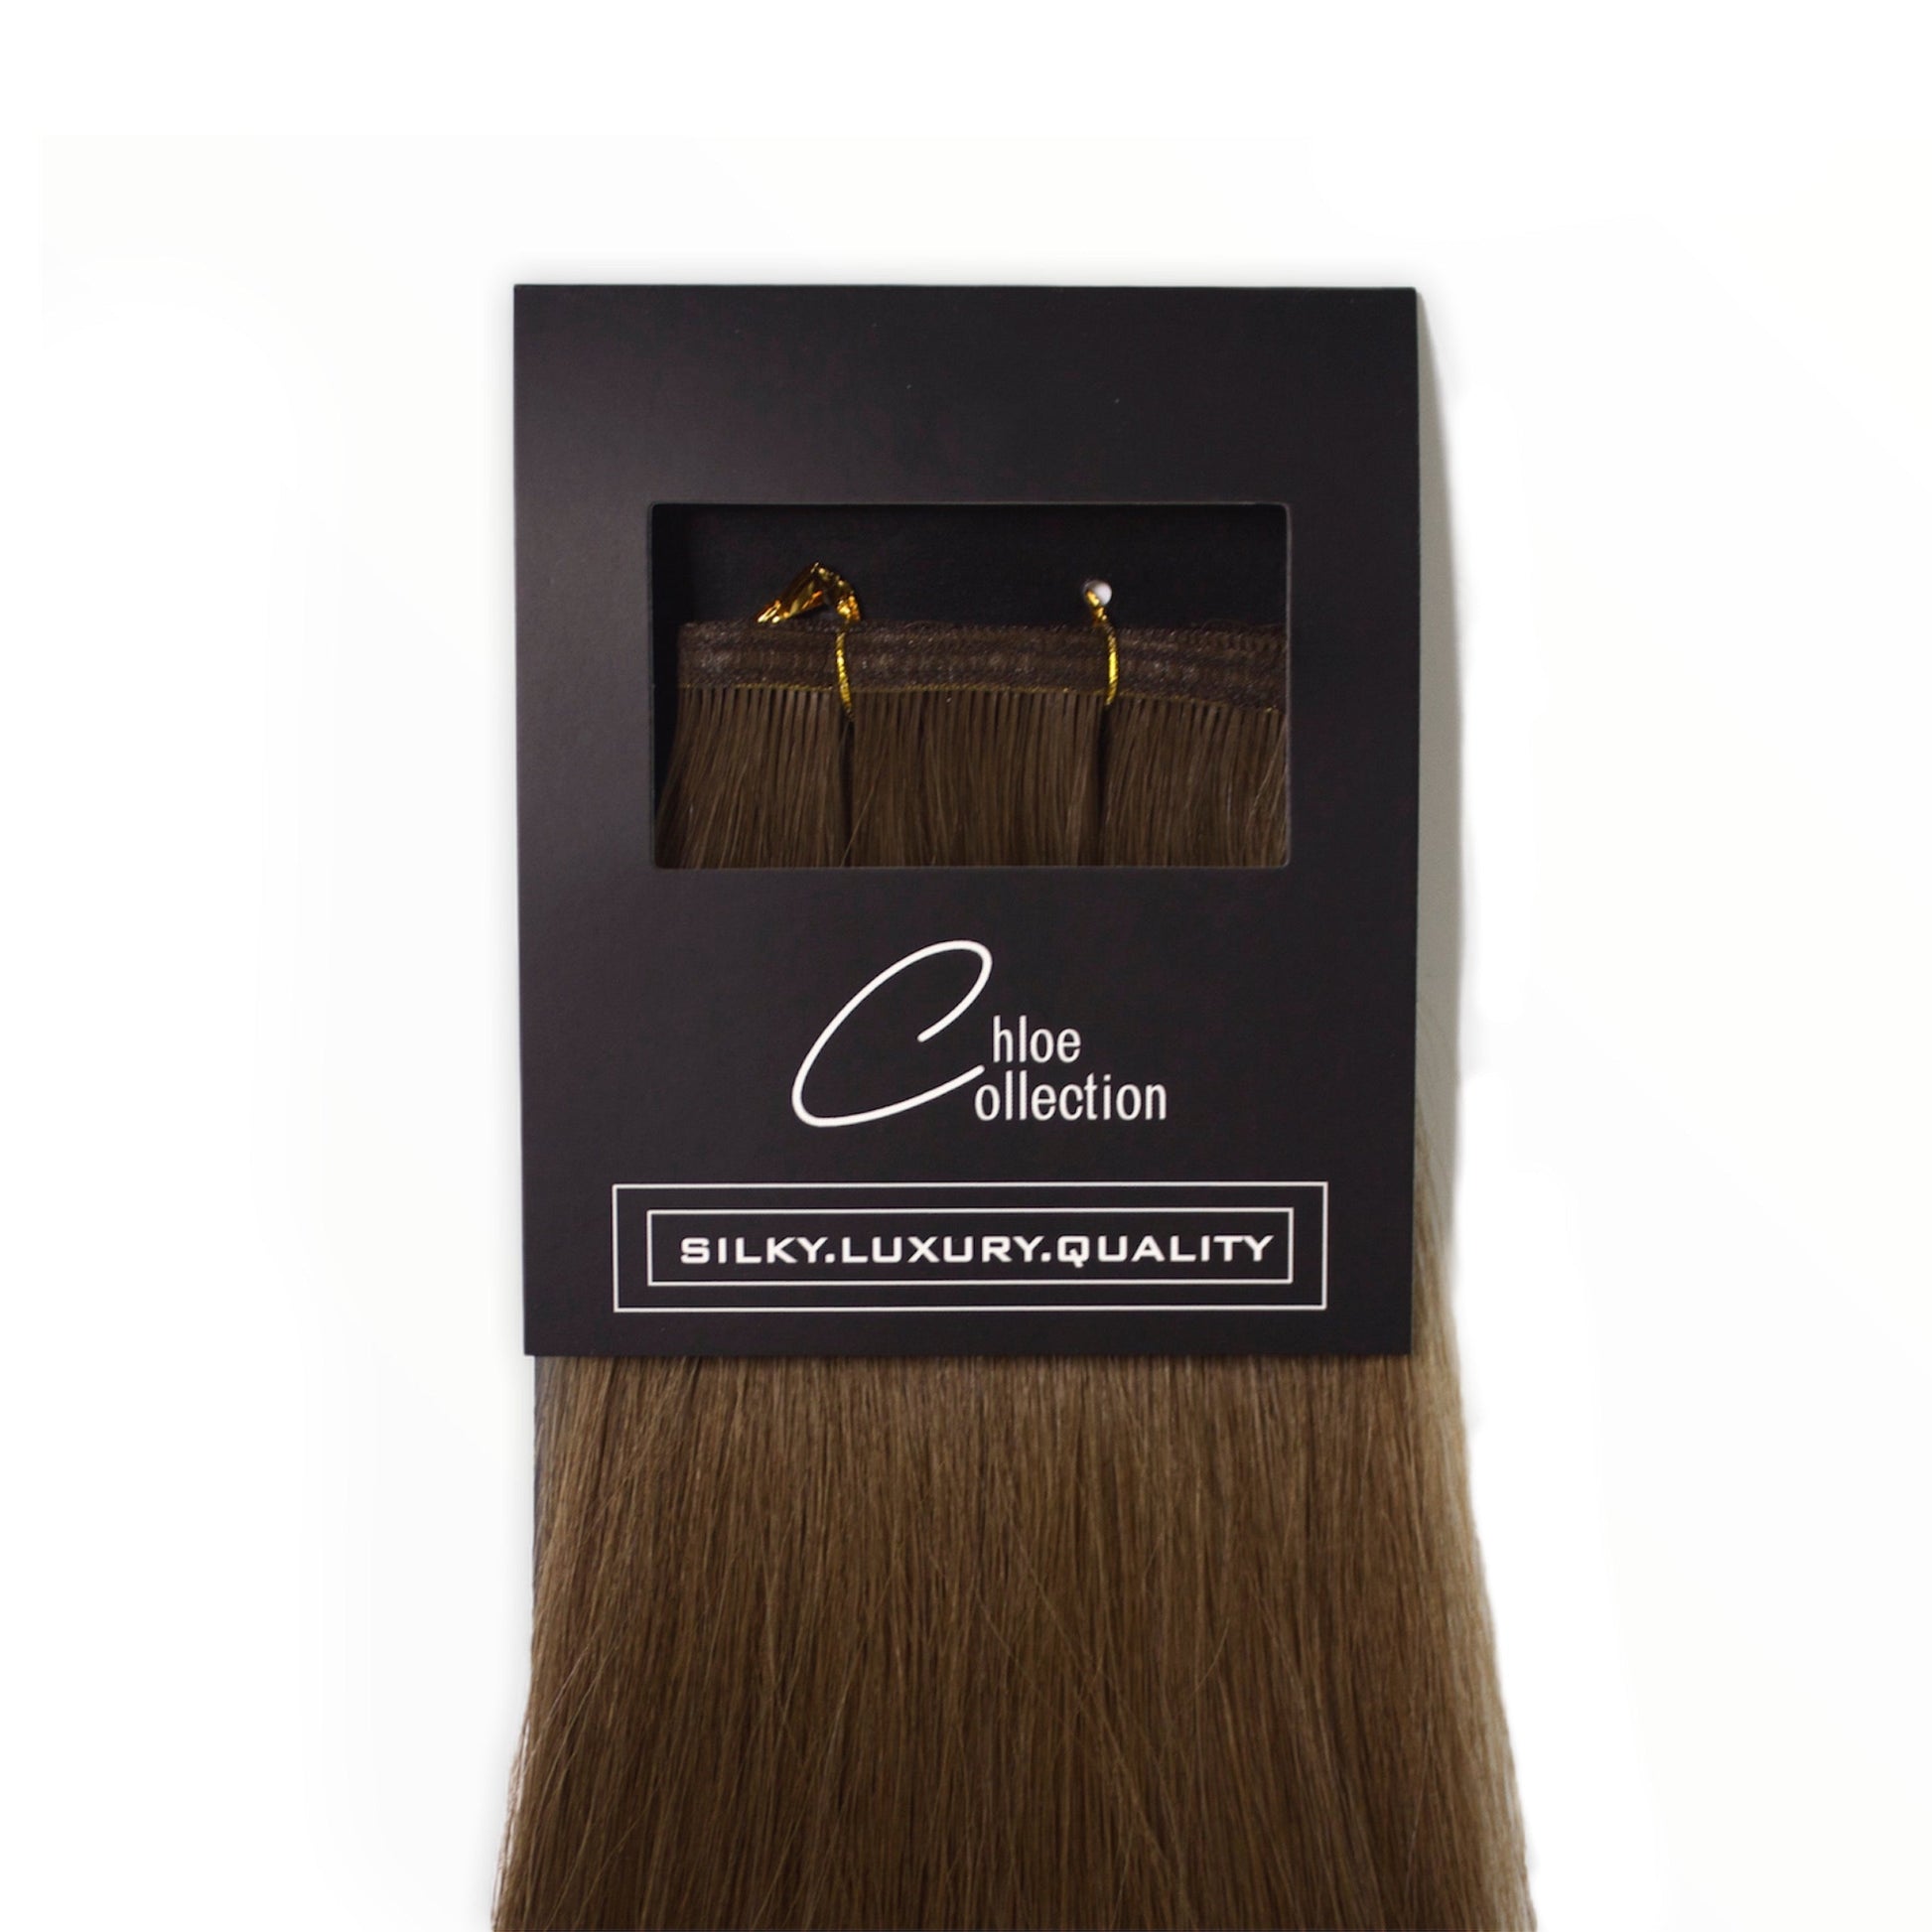 Chloe Collection - Thin weft 18" #5 - 60g.